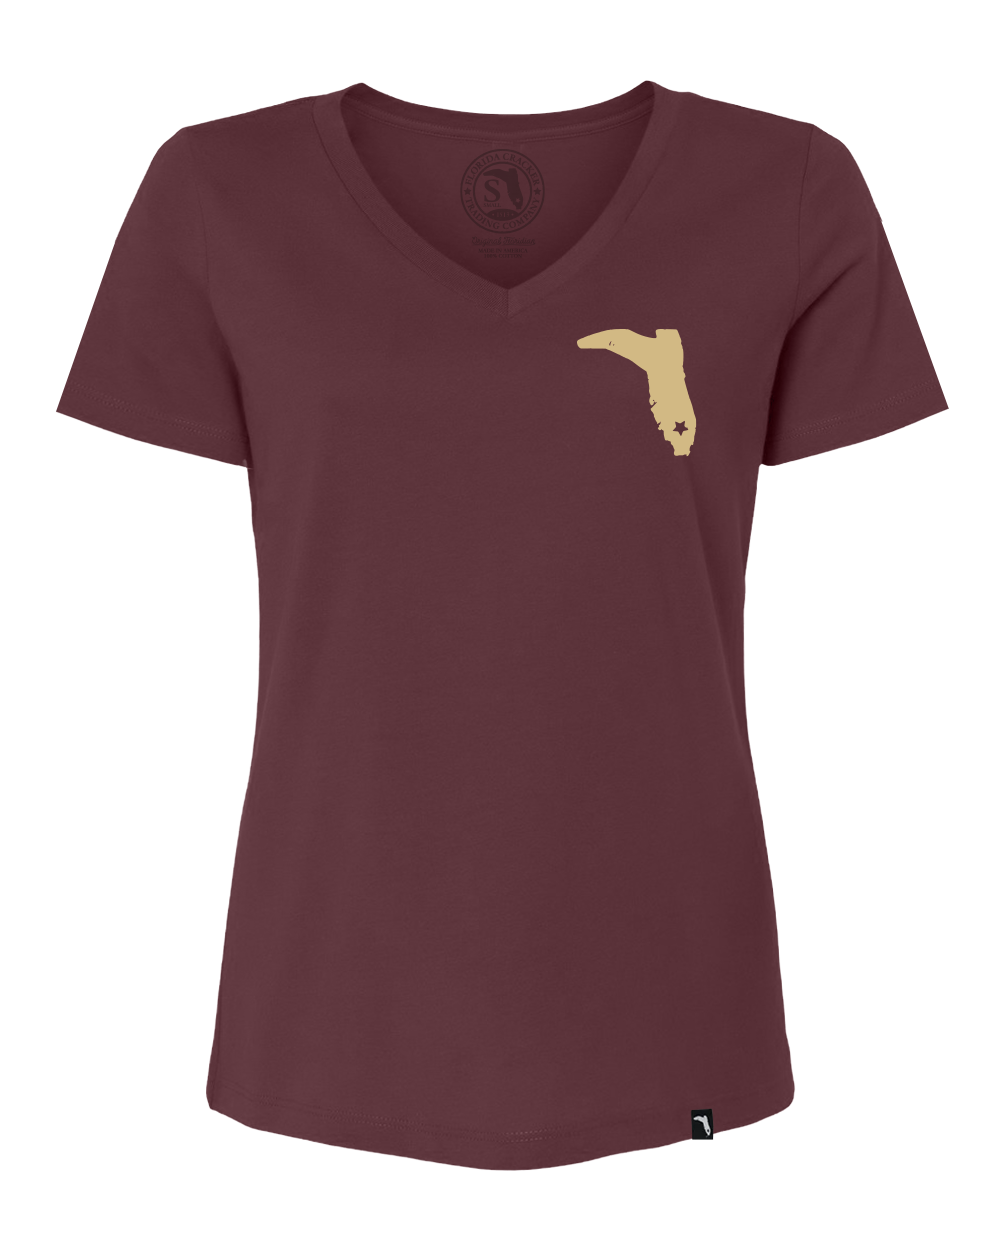 TAILGATE COLLECTION TALLAHASSEE V-NECK - MAROON